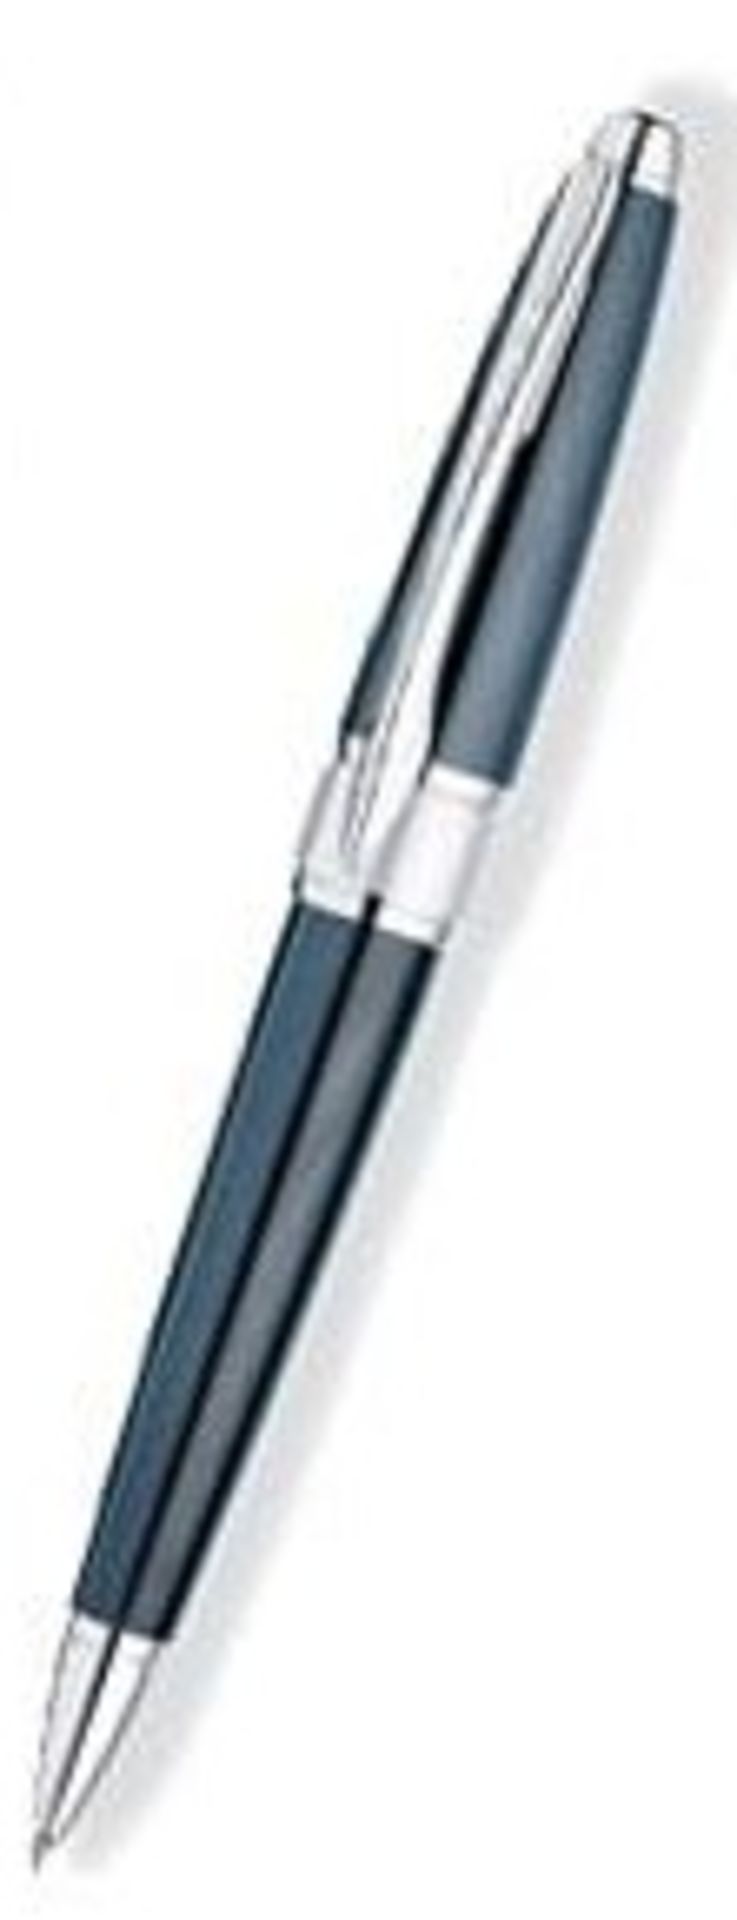 V Brand New Cross Apogee Black Lacquer Rollerball Pen With Chrome Trim In Presentation Box - WH